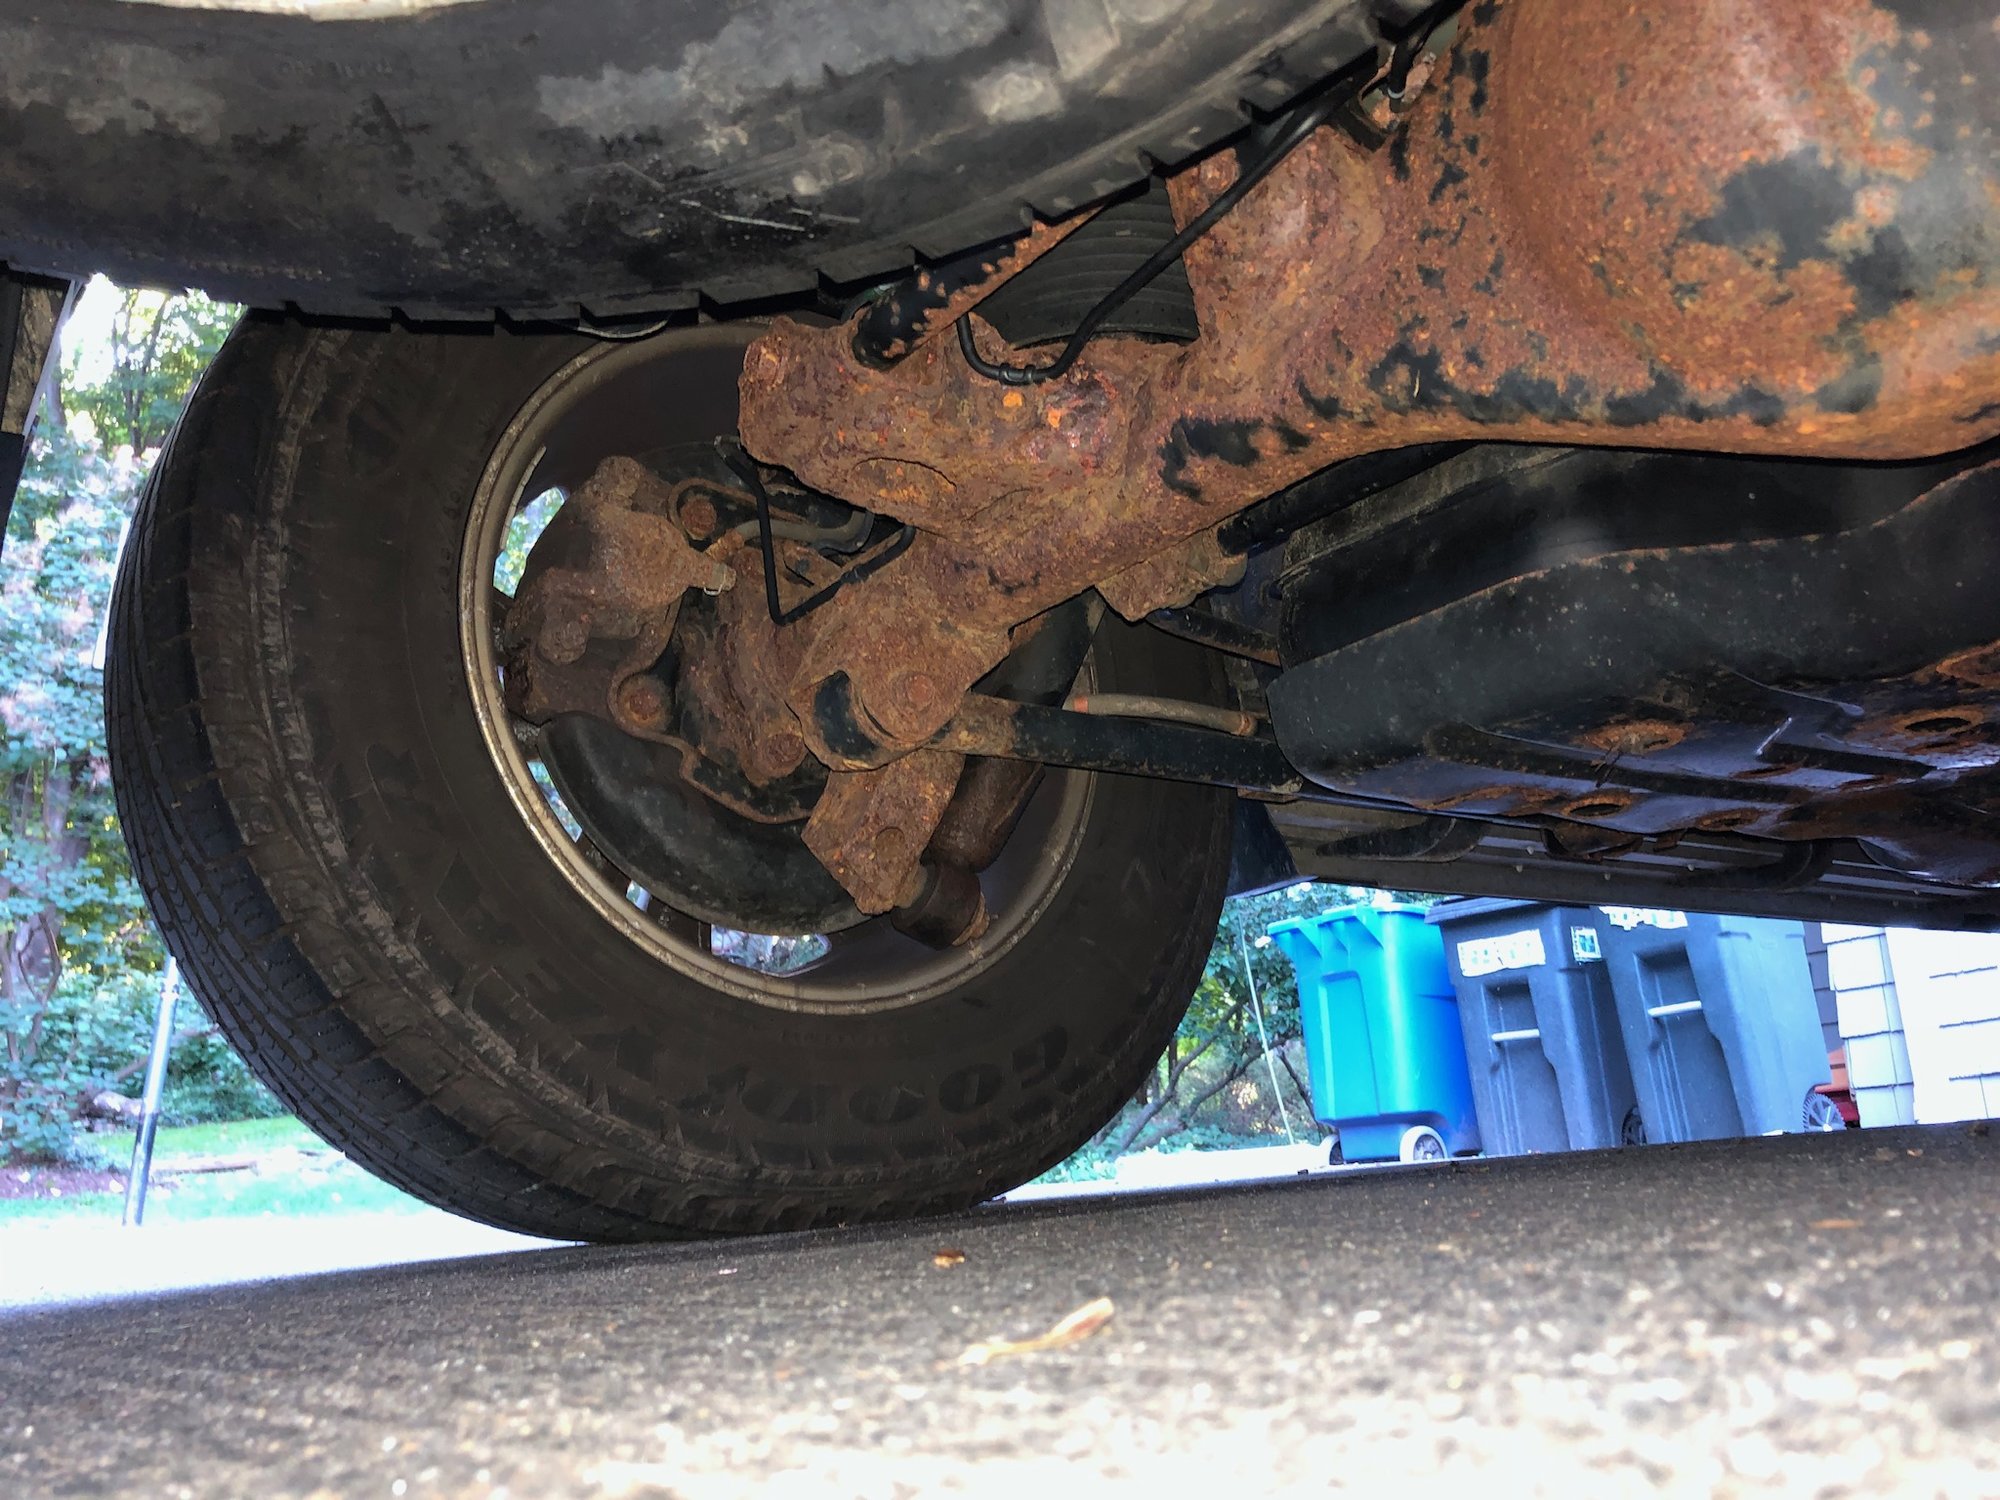 How much rust is too much / unsafe?